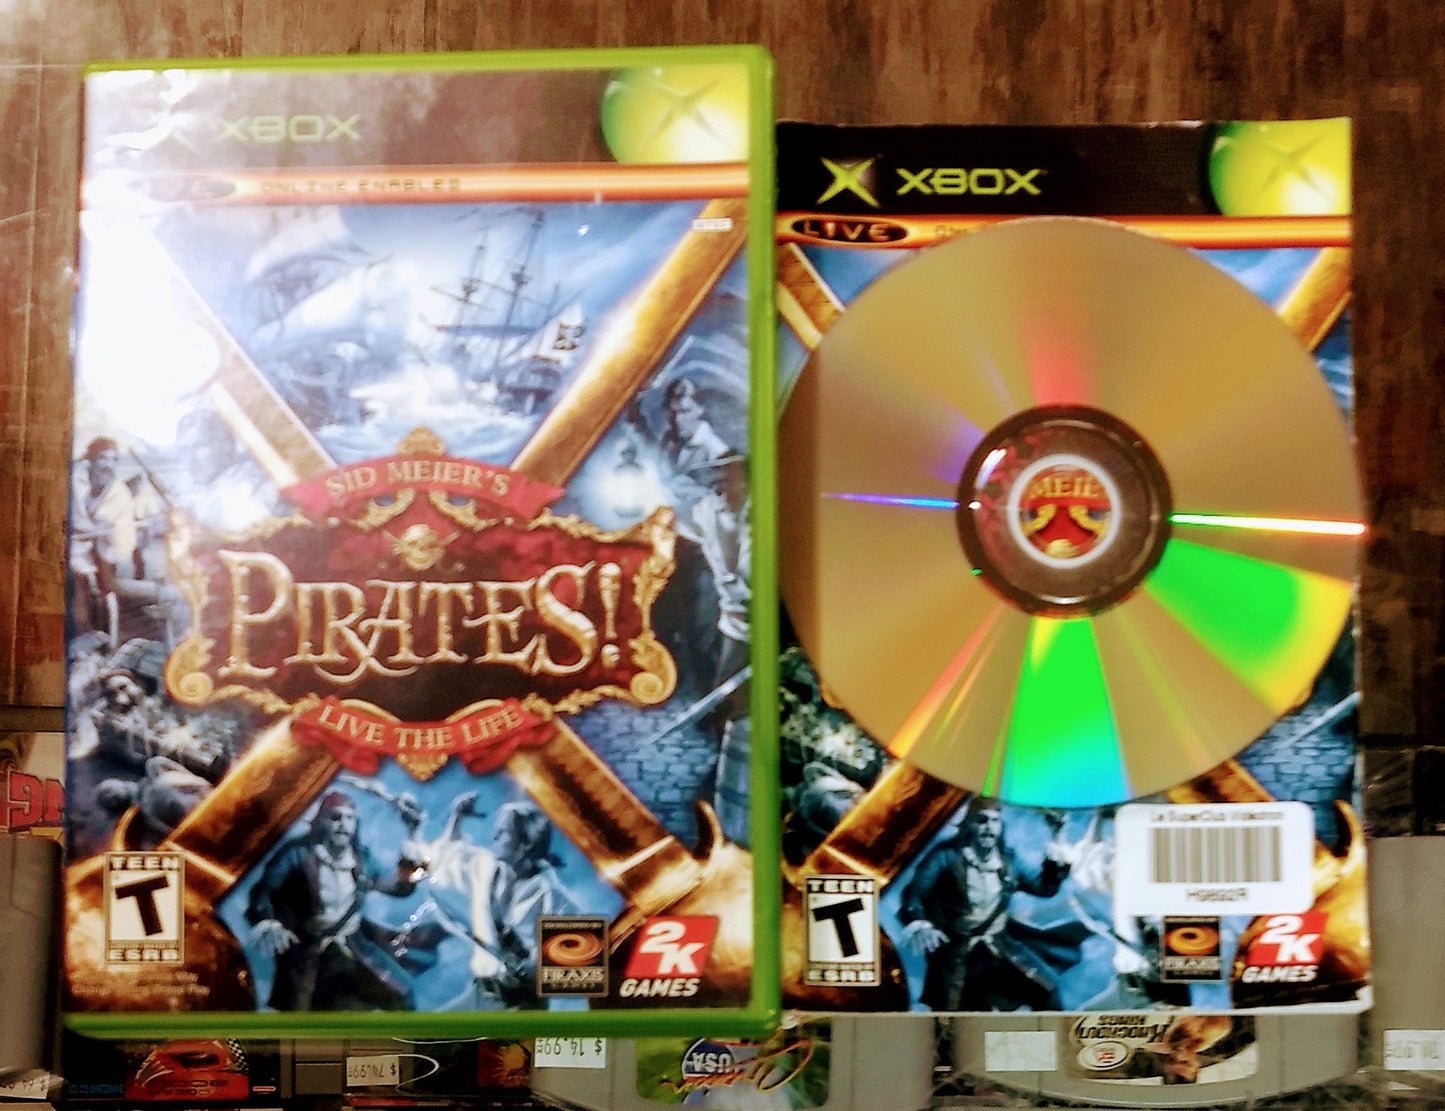 SID MEIERS PIRATES LIVE THE LIFE (XBOX) - jeux video game-x